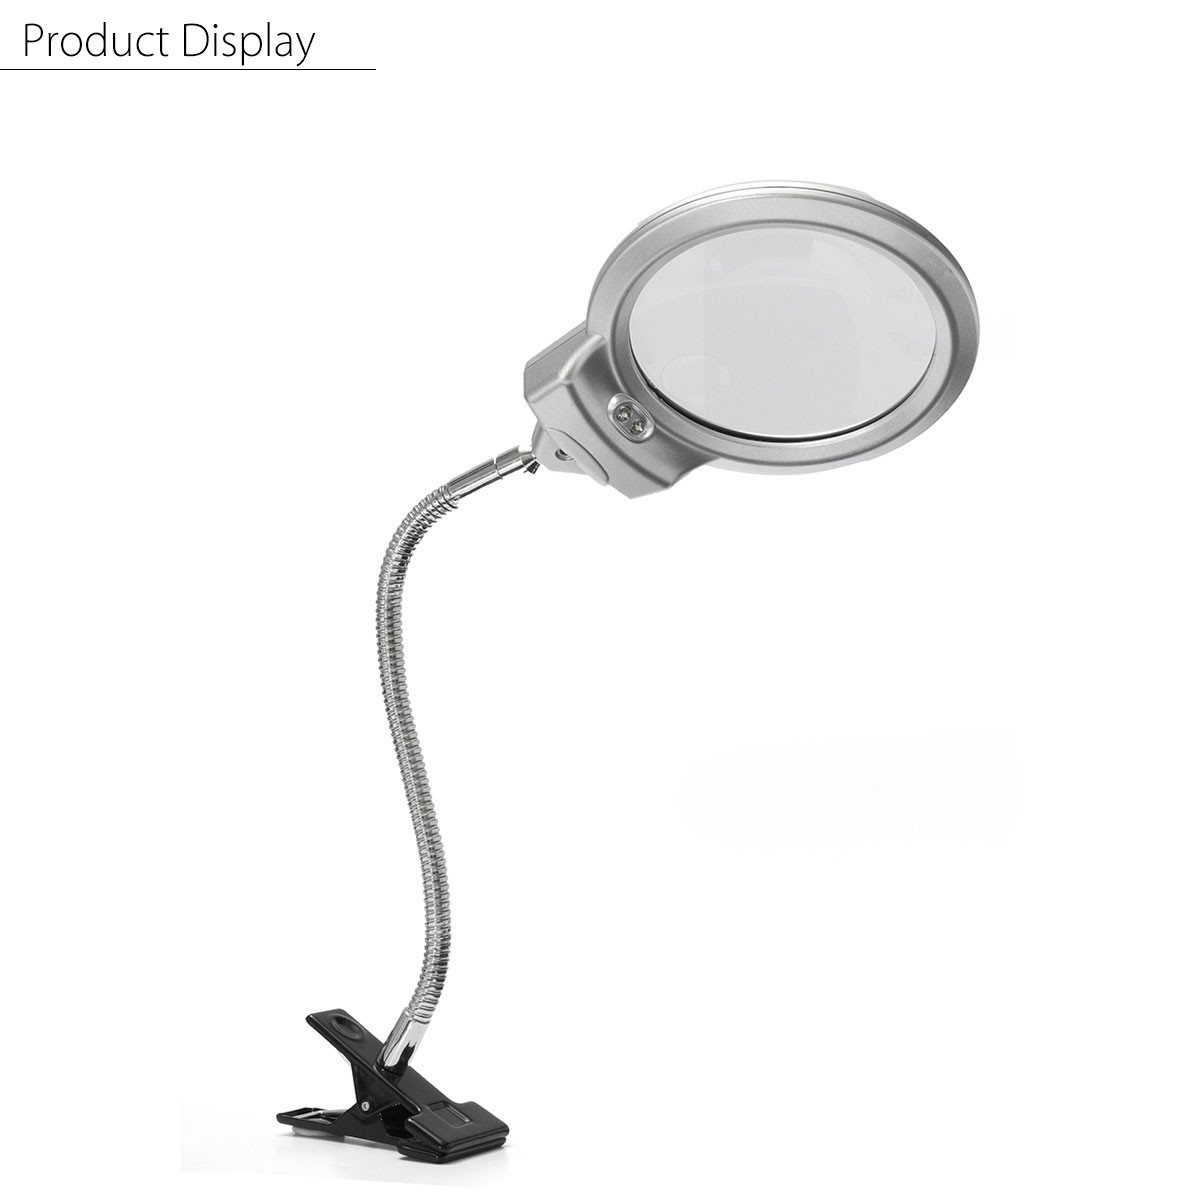 2 LED Light Magnifier Flexible Table Magnifying Glass with Clamp Reading/Welding Large Lens Table Top Desk Optical Instruments